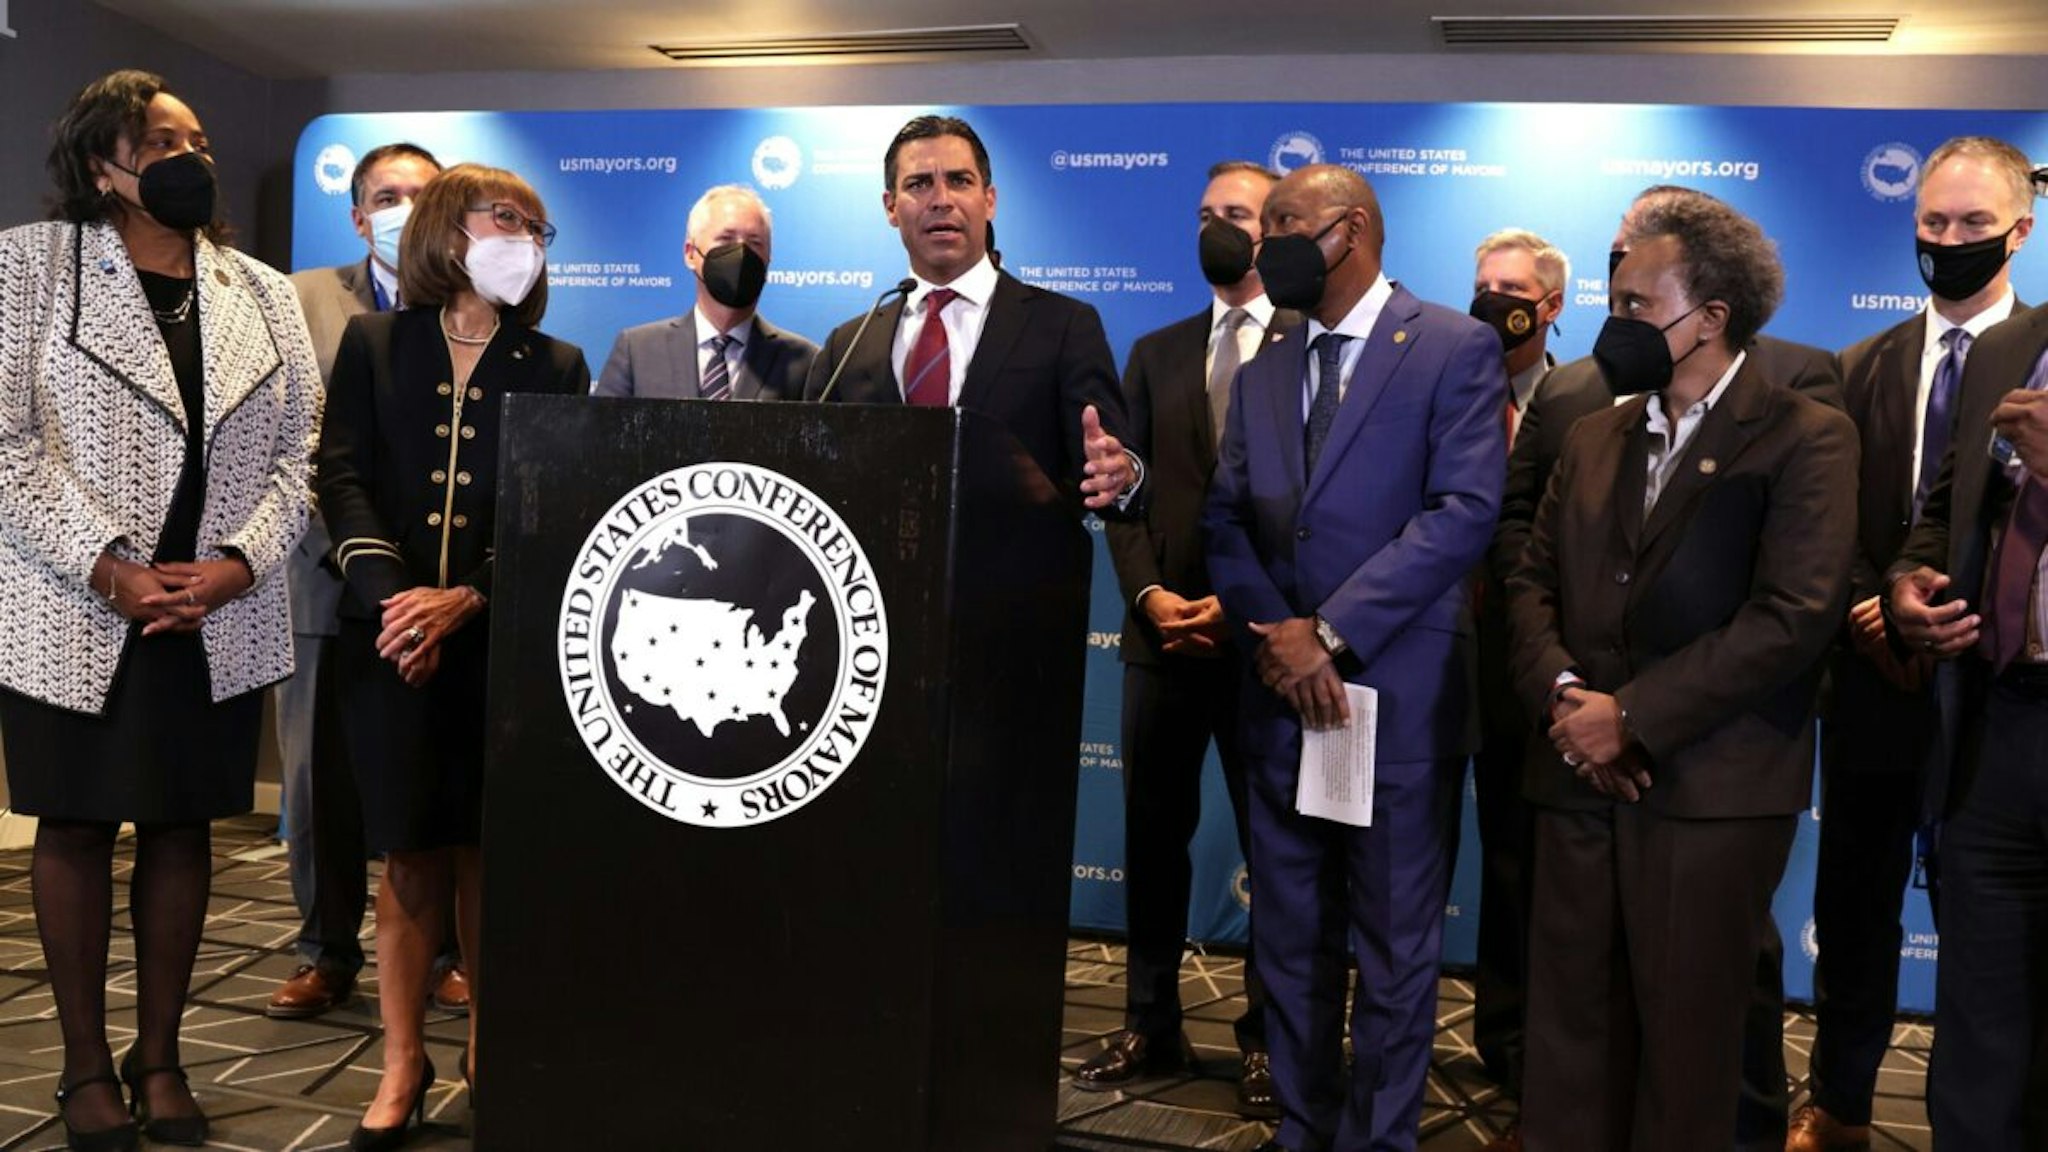 WASHINGTON, DC - JANUARY 19: Flanked by other mayors, Francis Suarez, Mayor of Miami and President of The United States Conference of Mayors (USCM), speaks during a news conference at the 90th Winter Meeting of USCM on January 19, 2022 in Washington, DC.